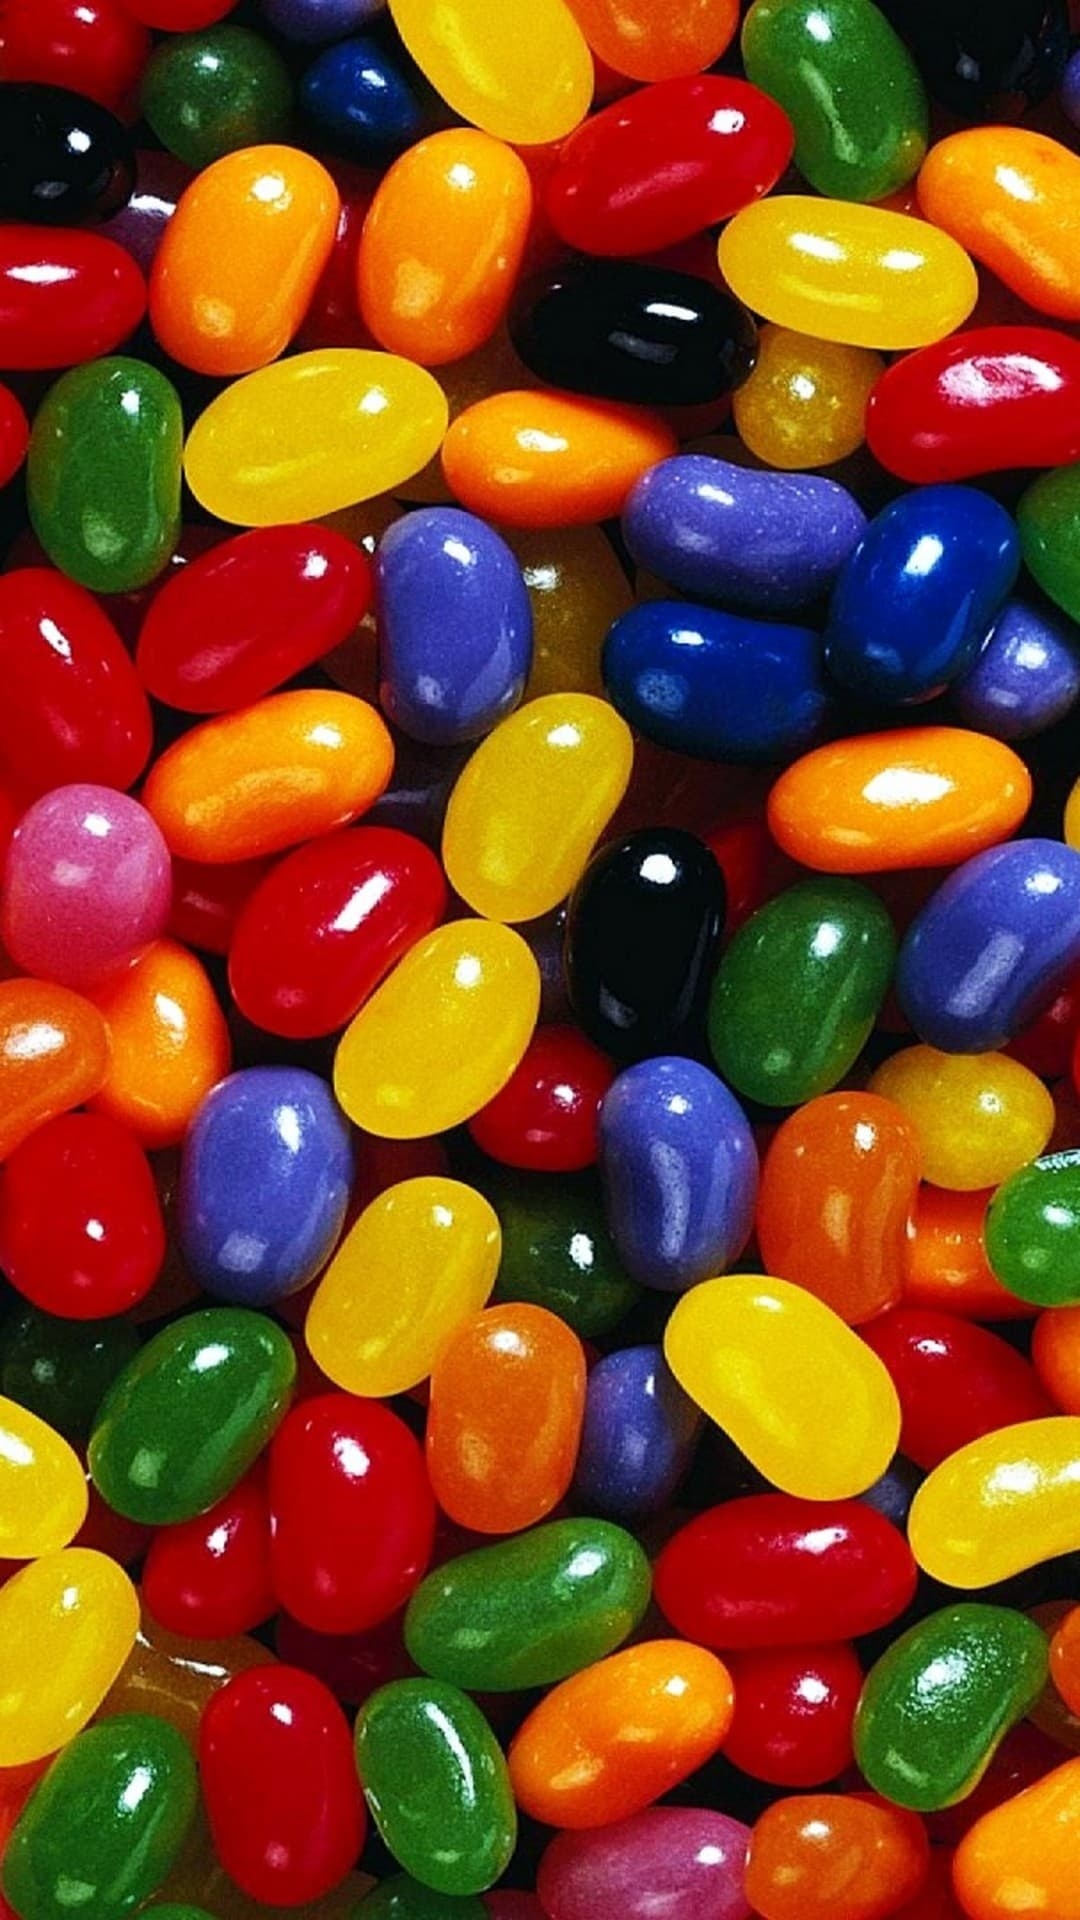 Variety of jelly beans, Assorted flavors, Yummy candies, Fun and colorful, 1080x1920 Full HD Handy